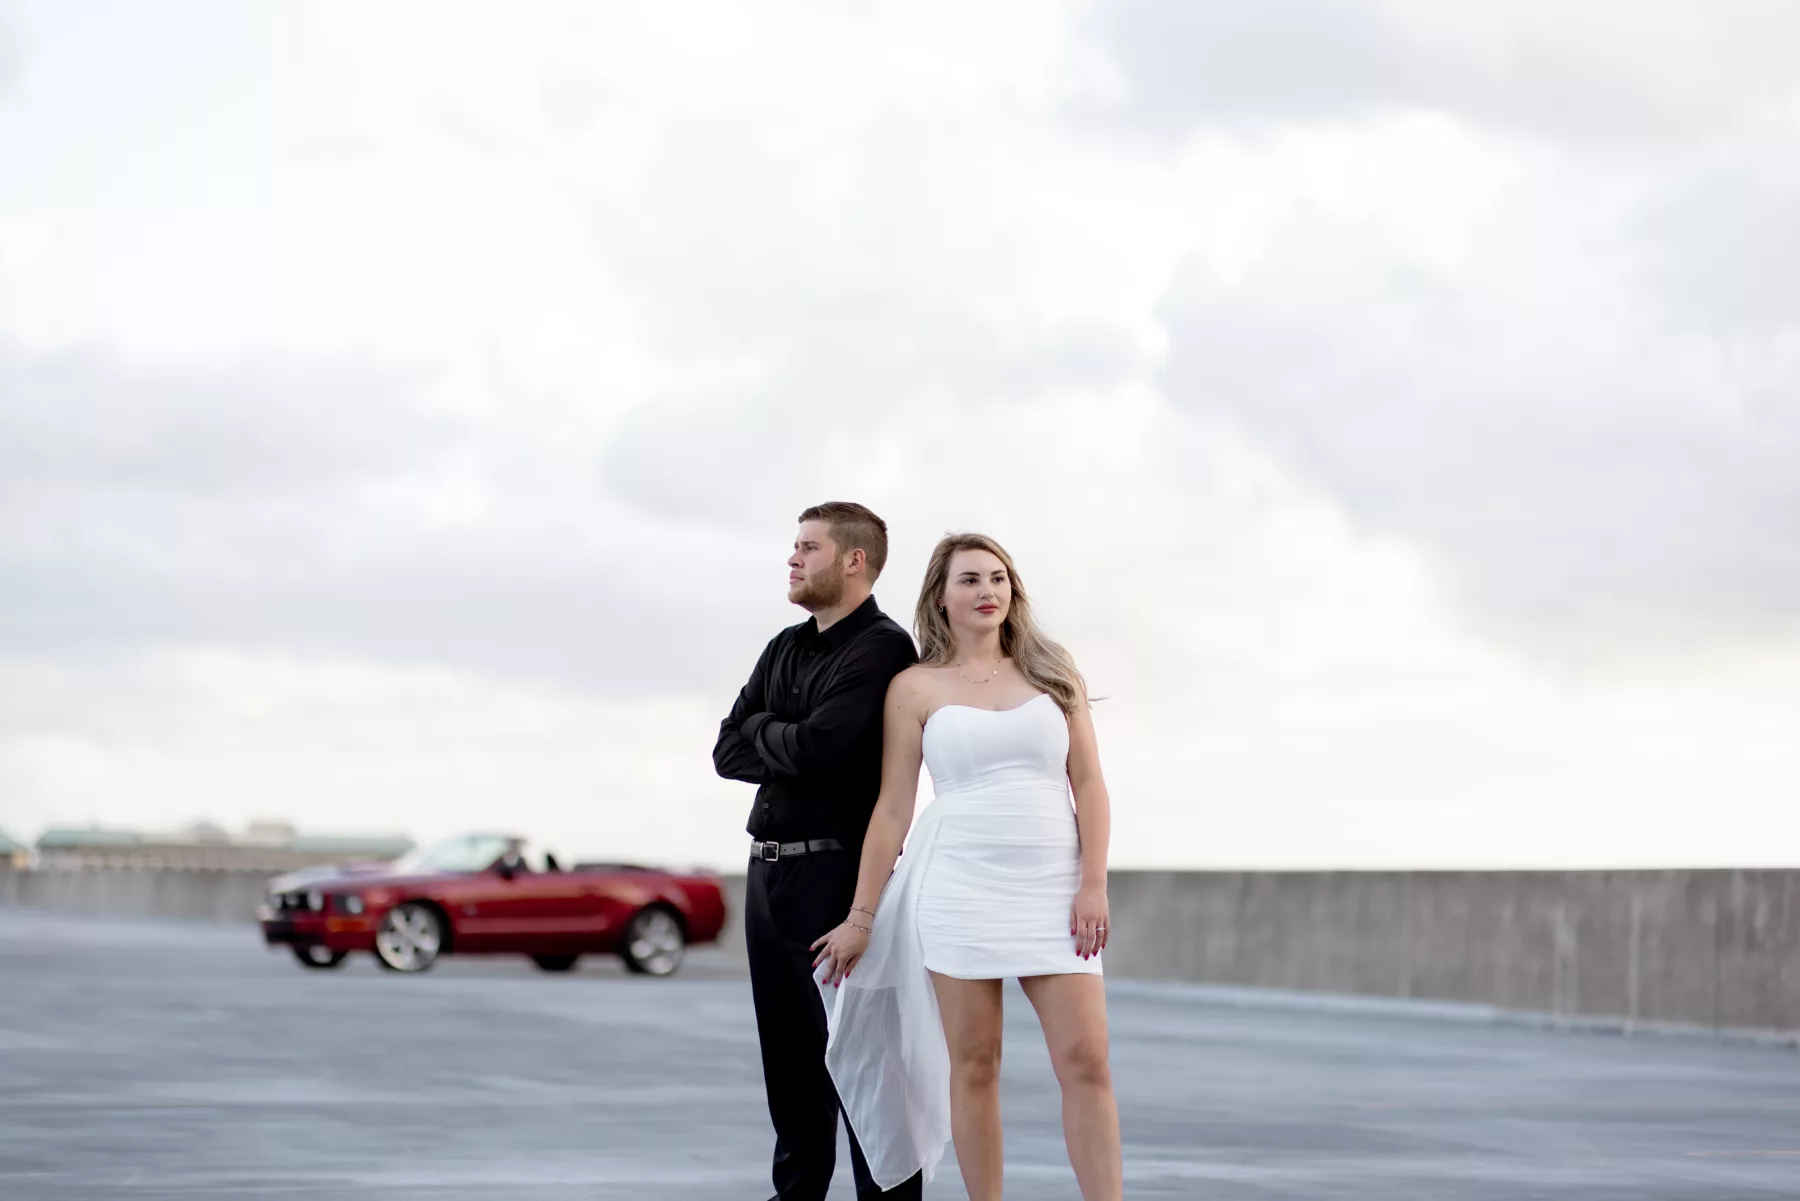 Evoke Photo and Film Downtown Tampa Rooftop Engagement Shoot